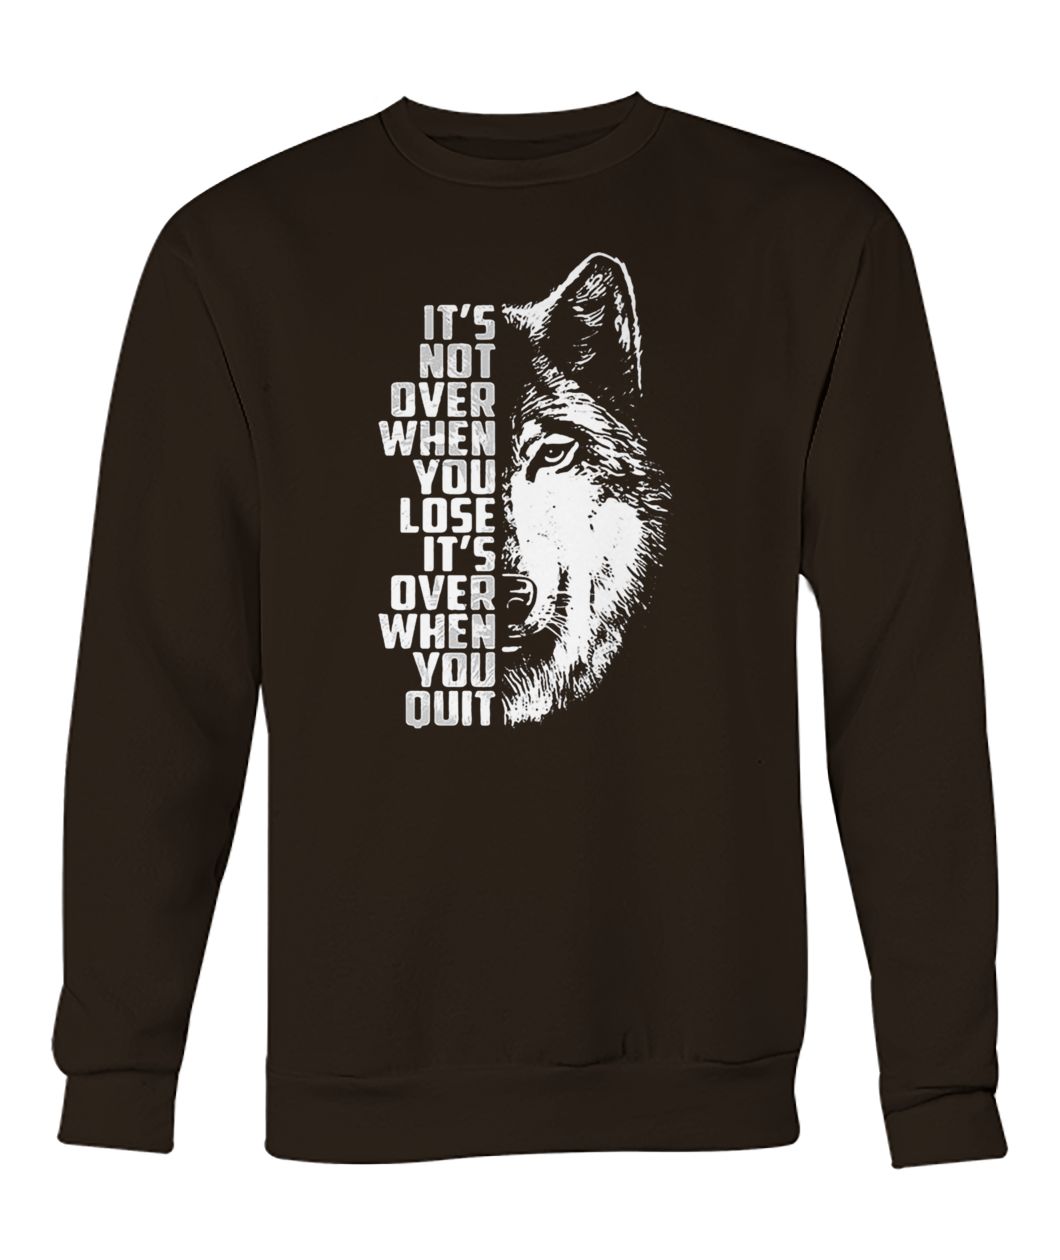 Wolf it's not over when you lose it's over when you quit crew neck sweatshirt